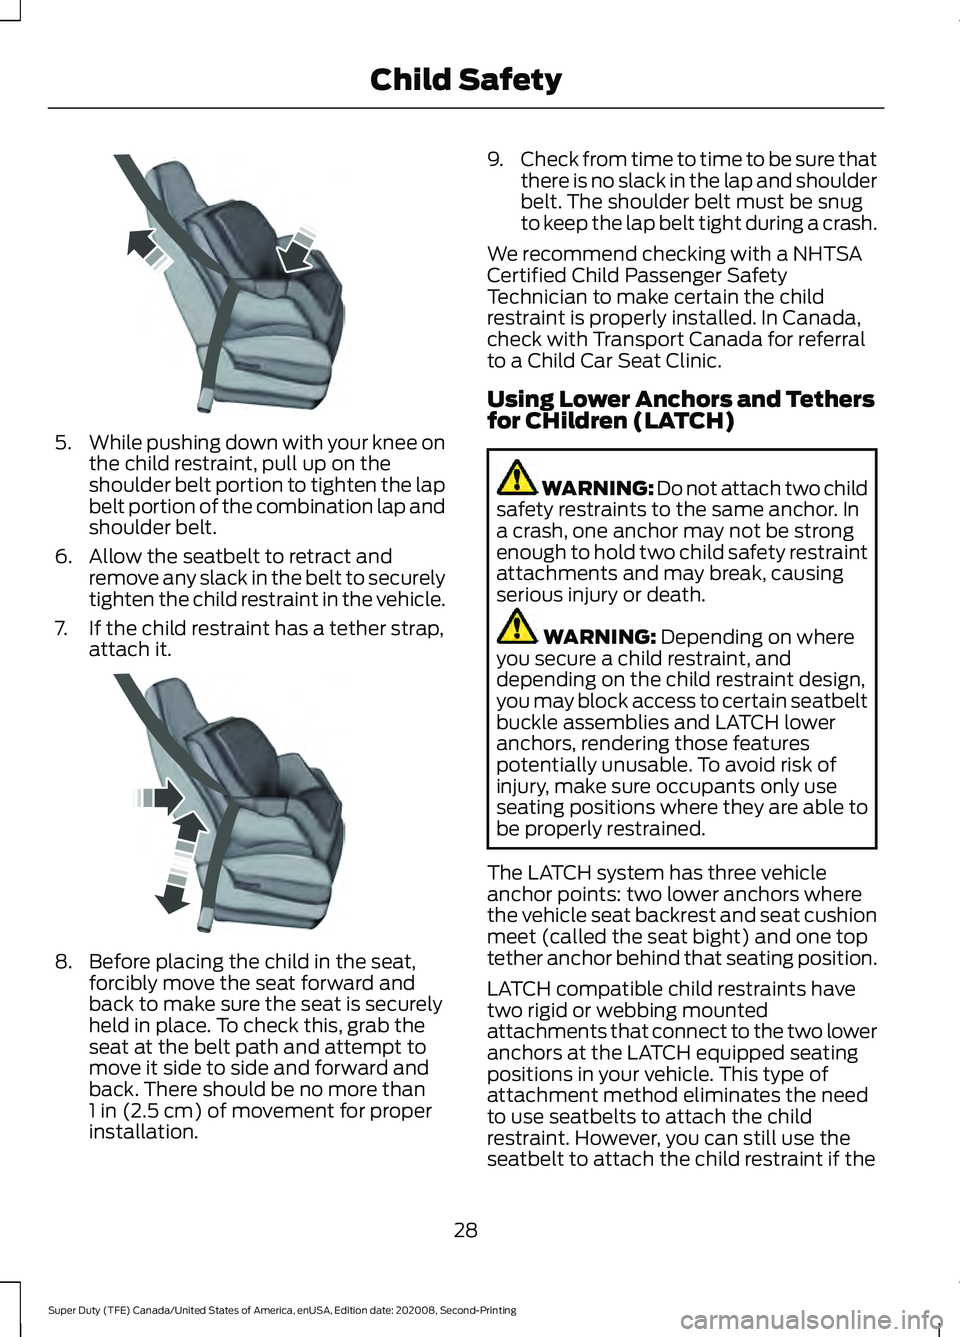 FORD SUPER DUTY 2021  Owners Manual 5.
While pushing down with your knee on
the child restraint, pull up on the
shoulder belt portion to tighten the lap
belt portion of the combination lap and
shoulder belt.
6. Allow the seatbelt to ret